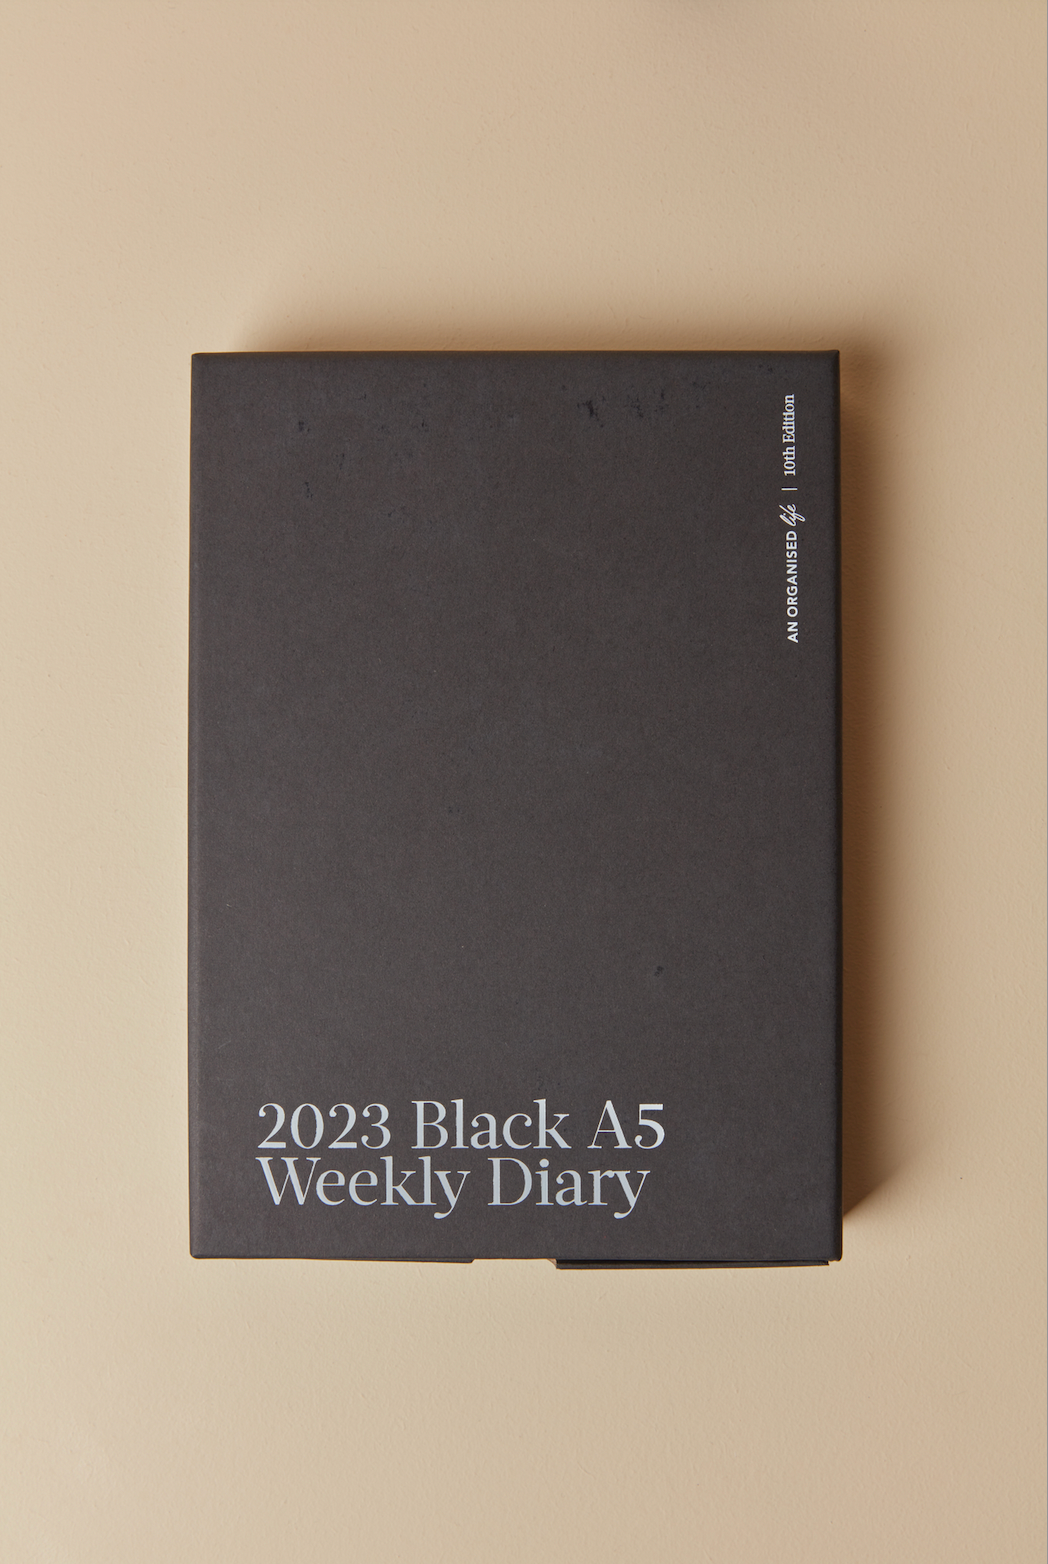 An Organised Life - 2023 A5 Weekly Diary, Black